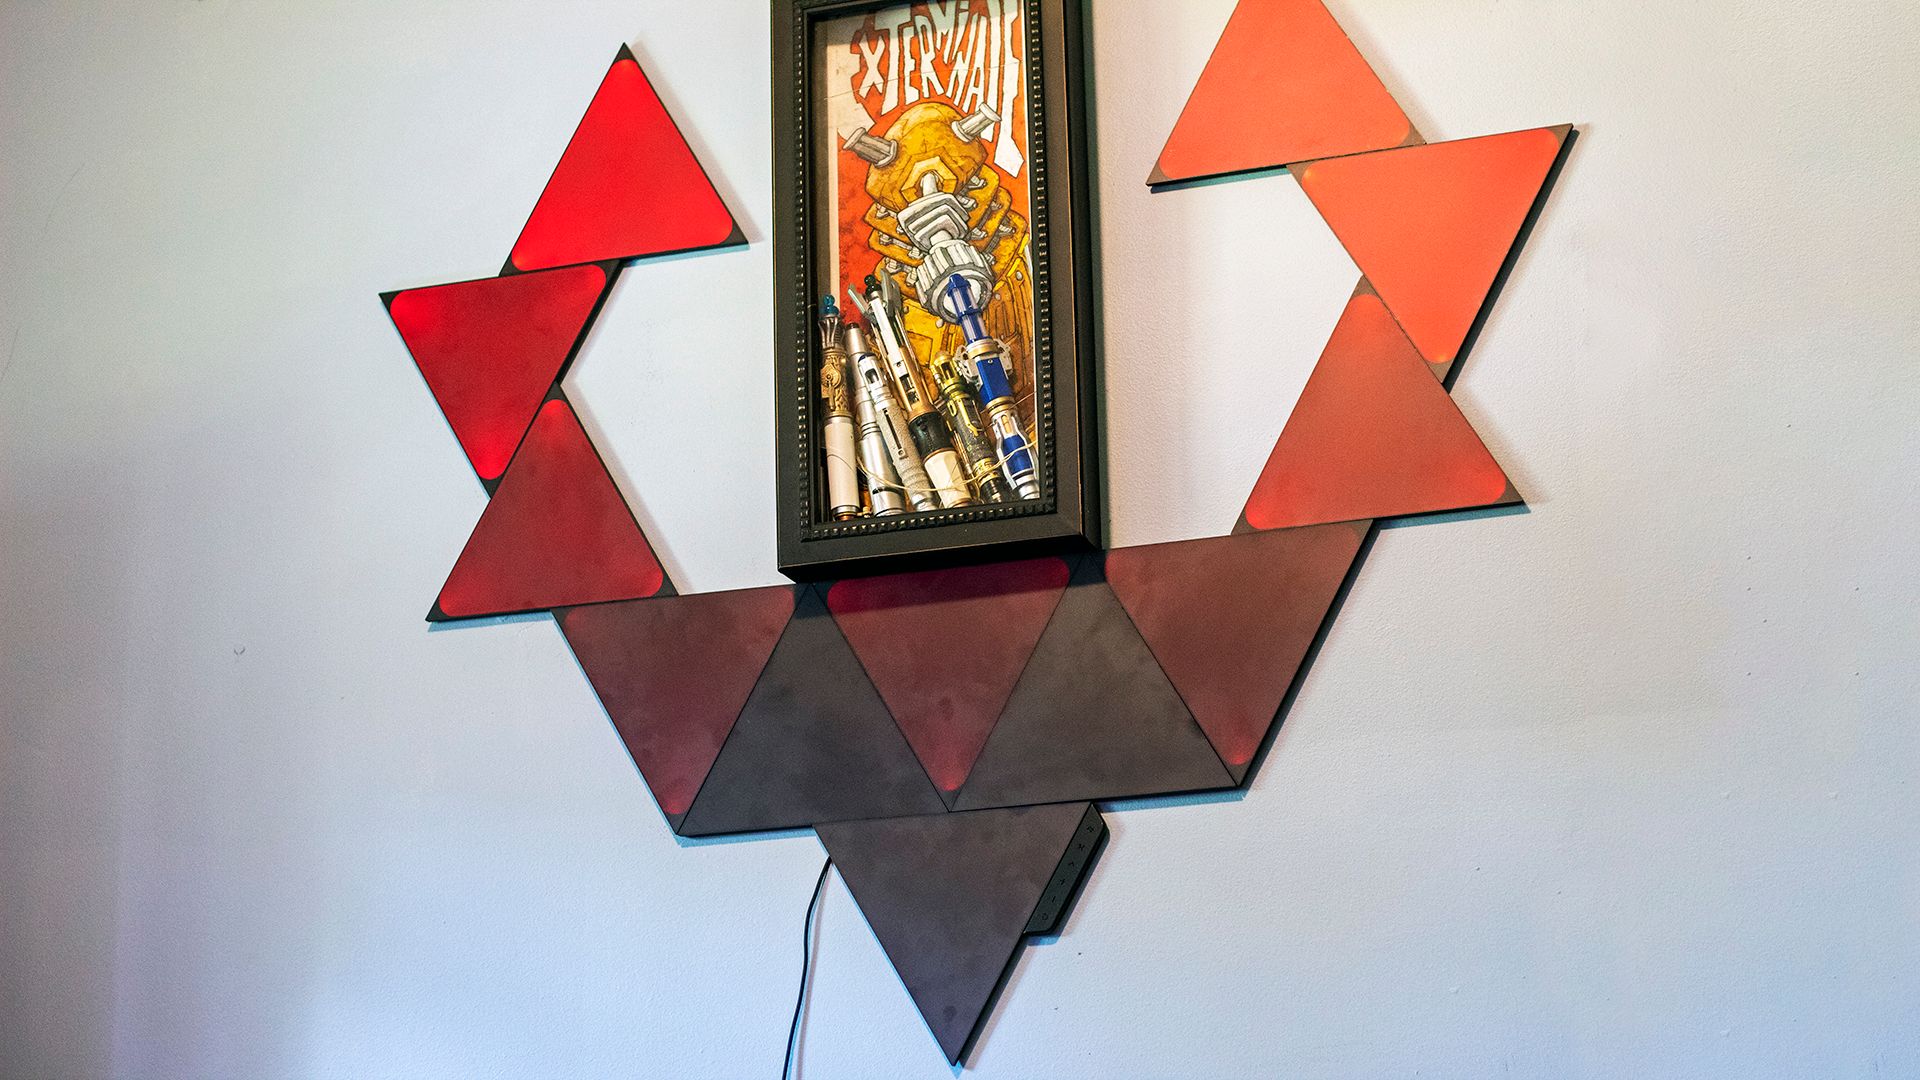 A set of black triangles turning red on a wall